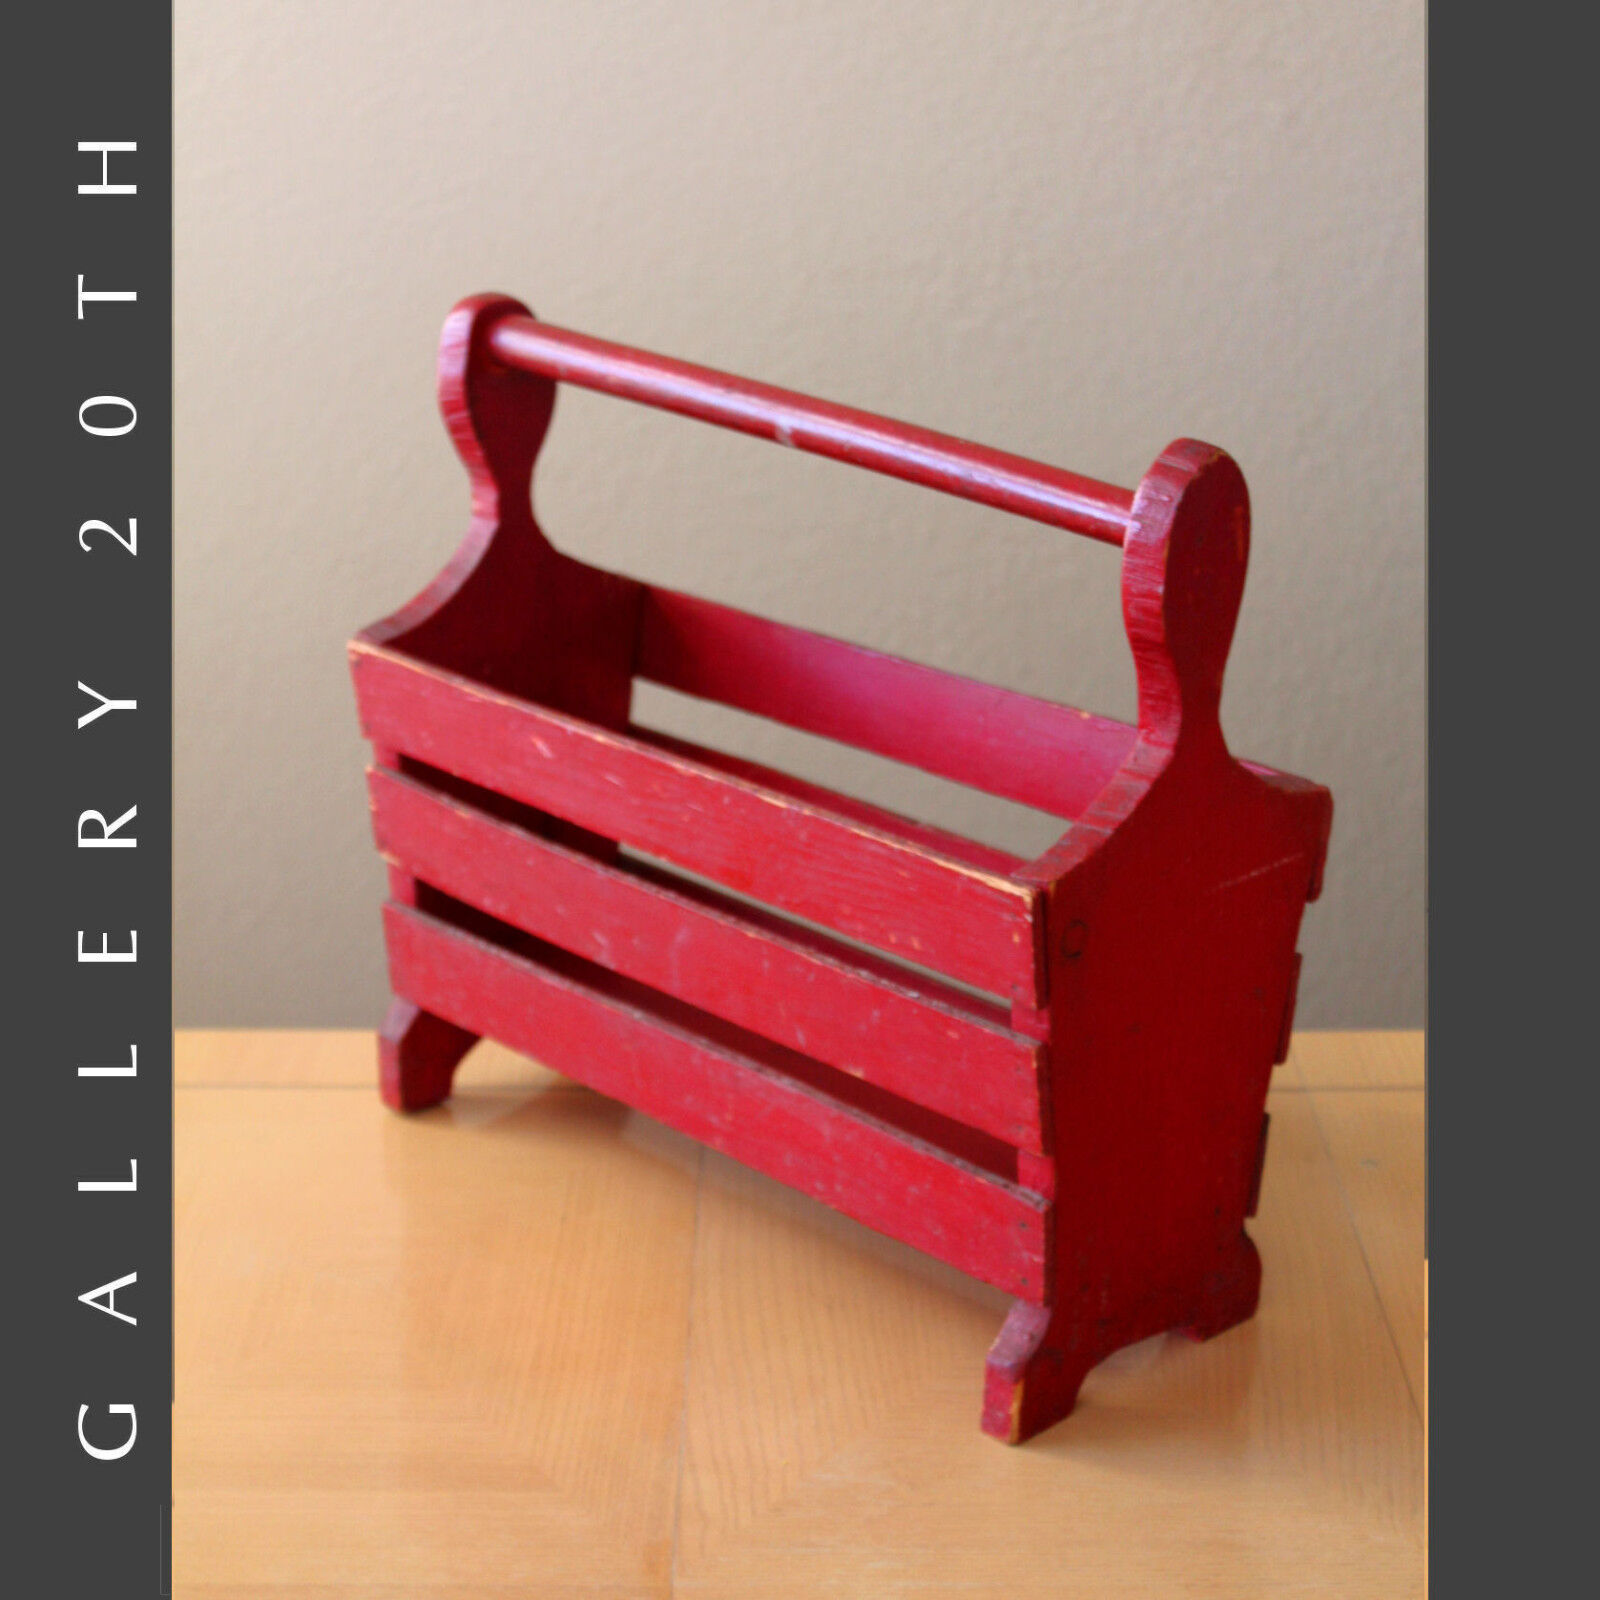 CHARMING SHABBY CHIC WOOD MAGAZINE RACK DISTRESSED RUSTIC RED 50S  60S VTG MCM